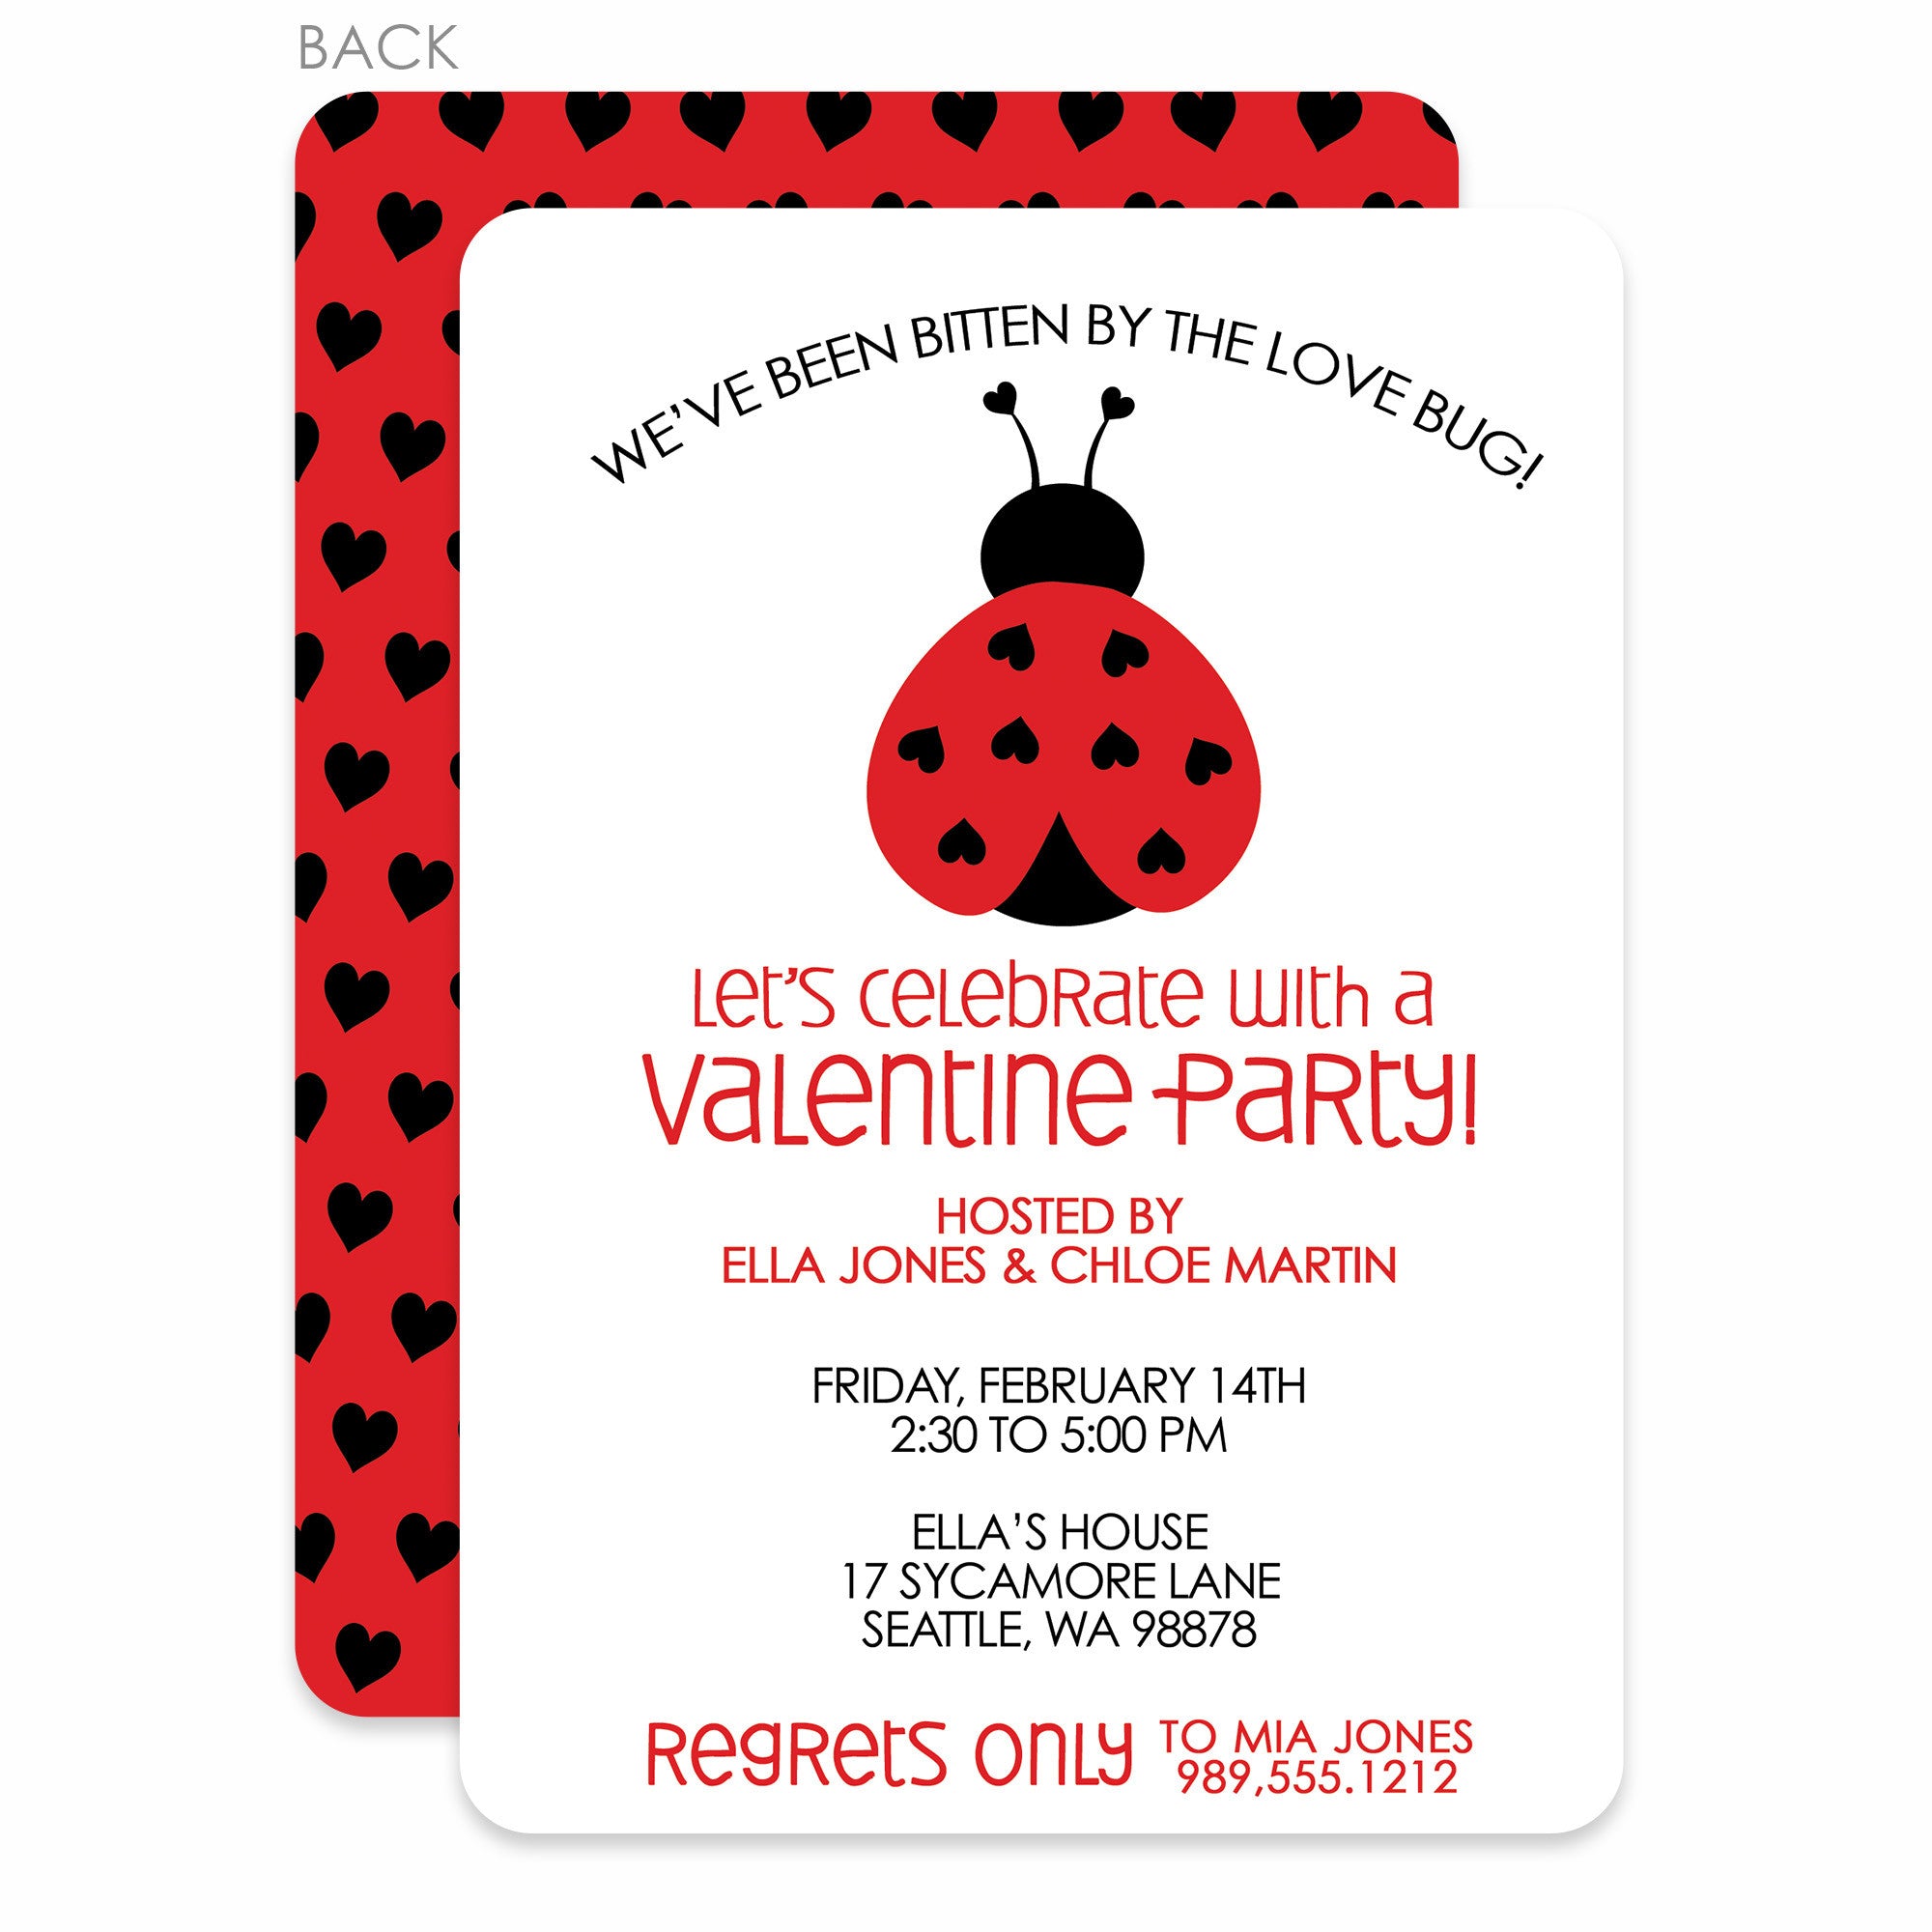 Valentine's Day Party Invitation, Love bug with ladybug and hearts. Printed on premium heavyweight cardstock, from Pipsy.com